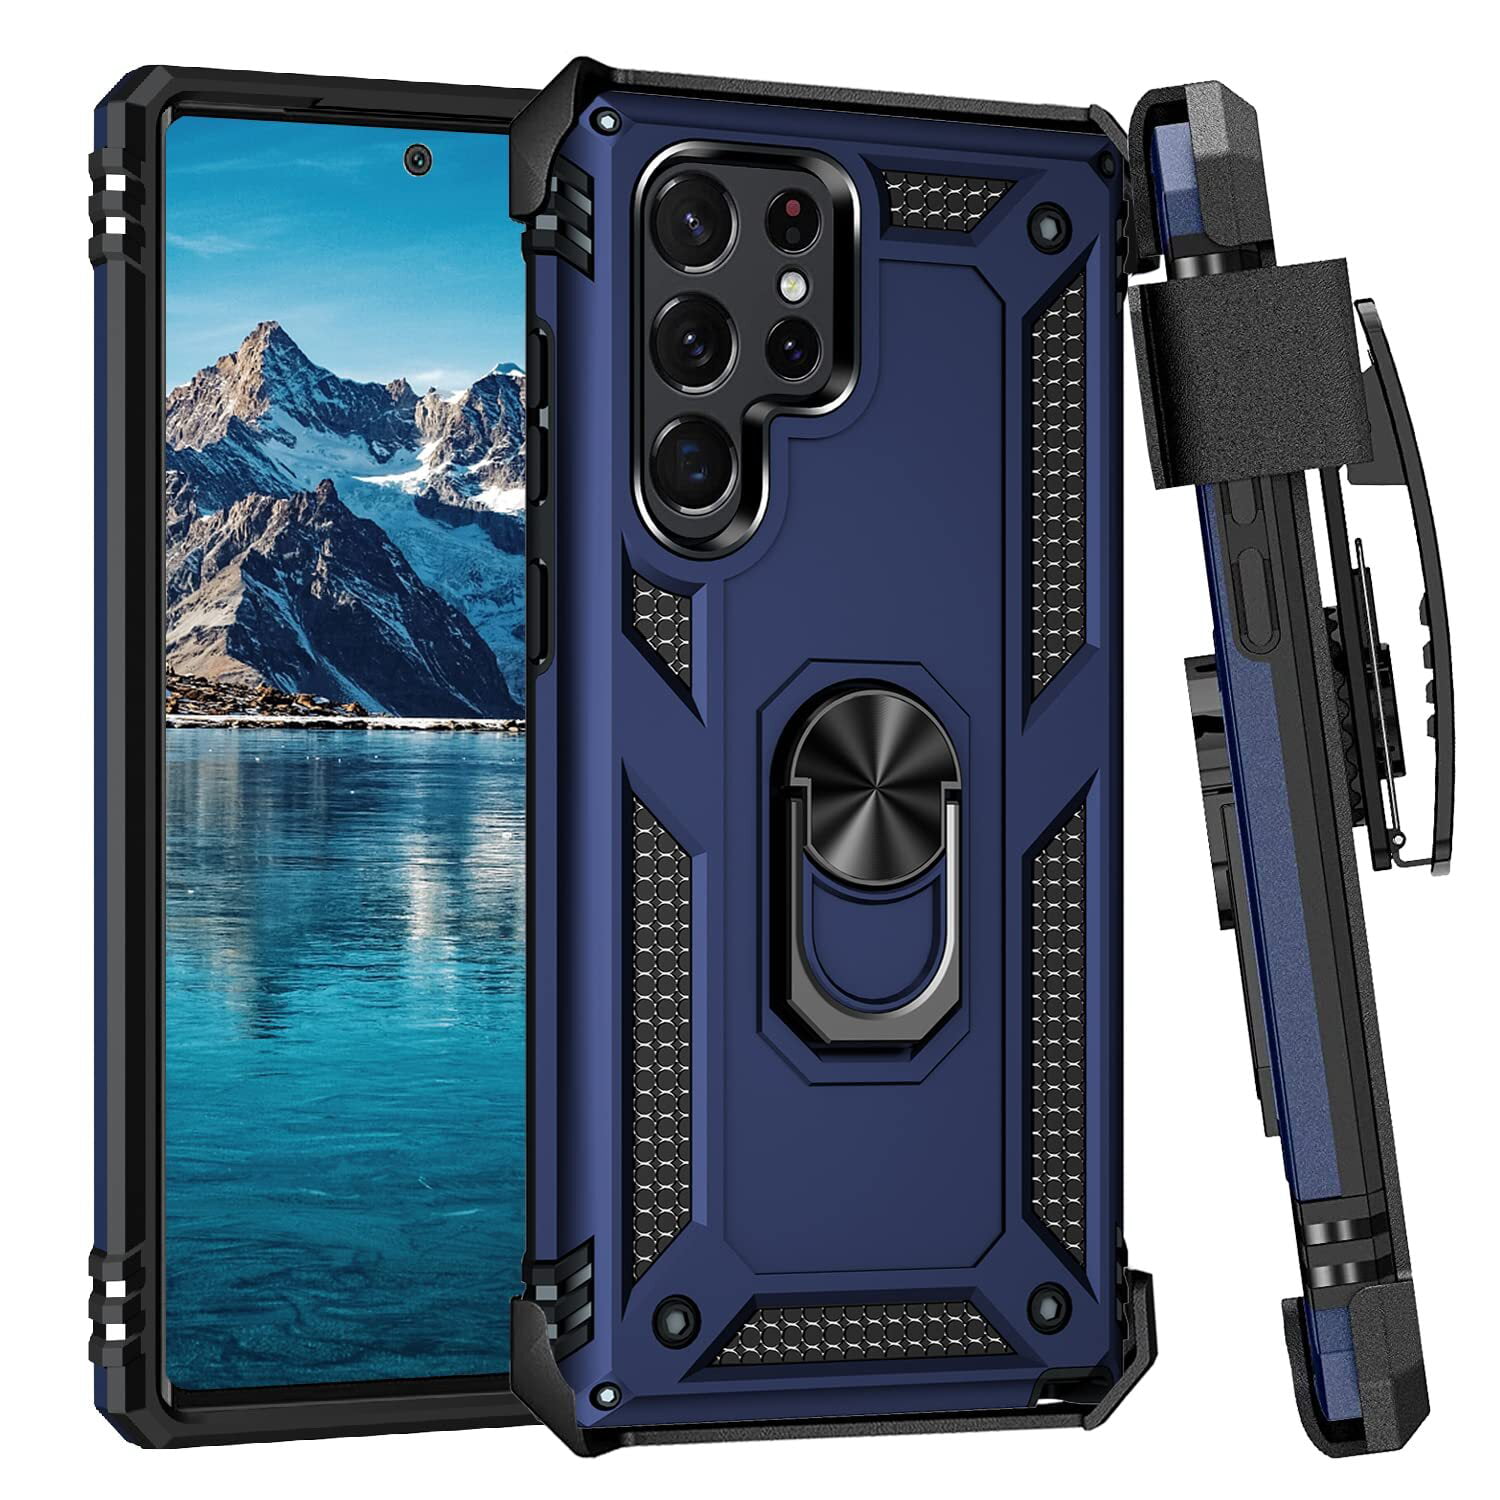 Case for Samsung Galaxy S21 Ultra with Belt Clip,Military Grade Drop Full-Body Protection Cover Blue 360 Degree Rotating Kickstand case for Galaxy S21 Ultra Belt Clip Holster&Magnetic Ring Holder 